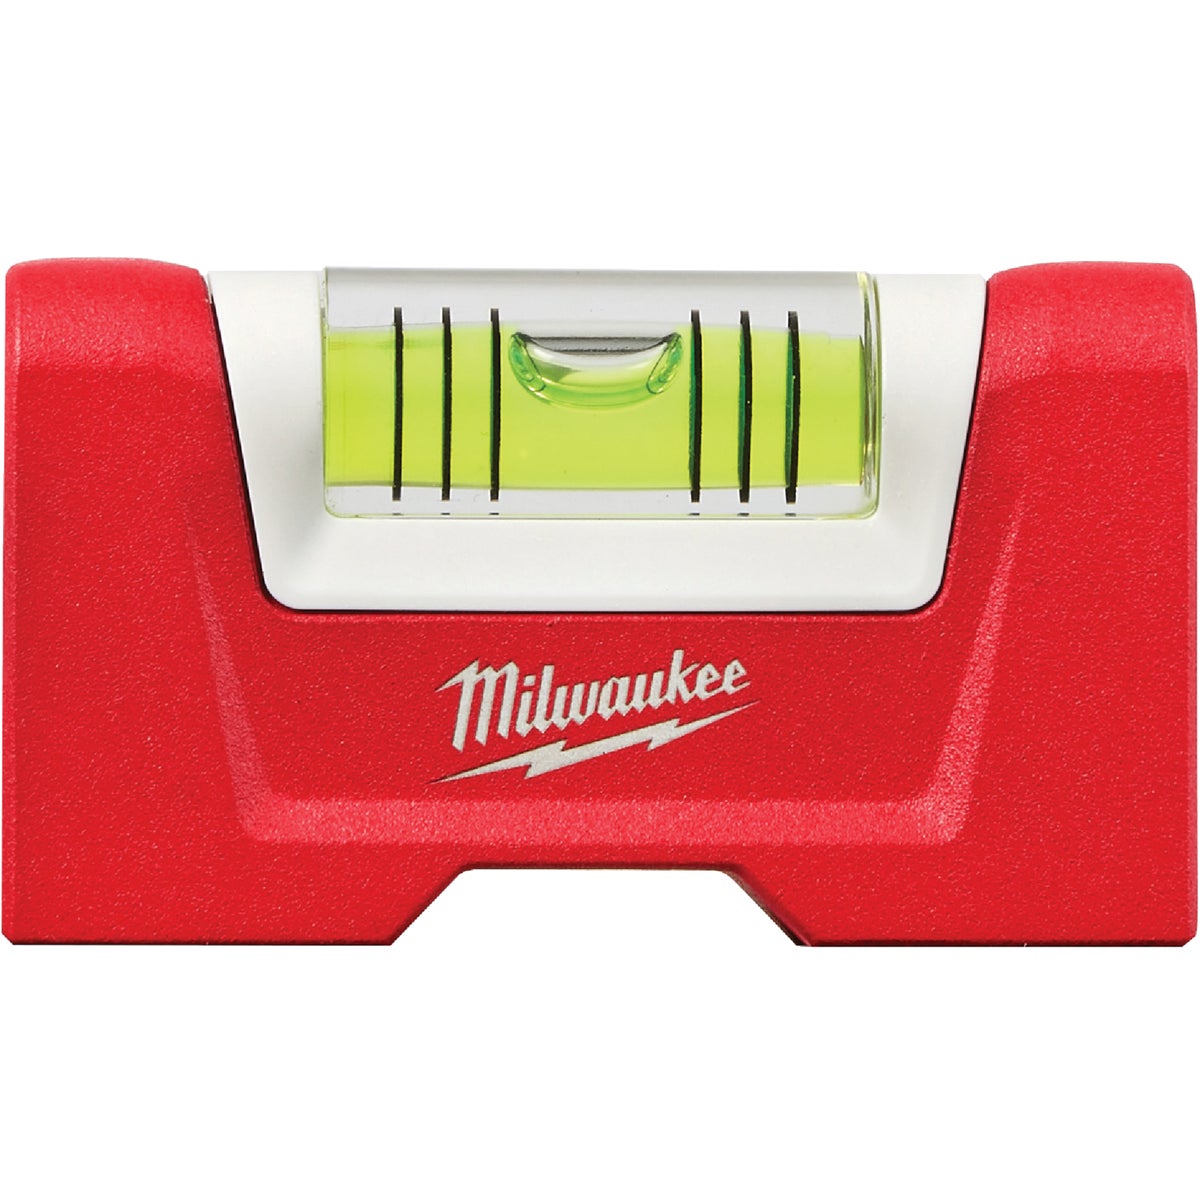 Milwaukee 3 In. Magnetic Pocket Level